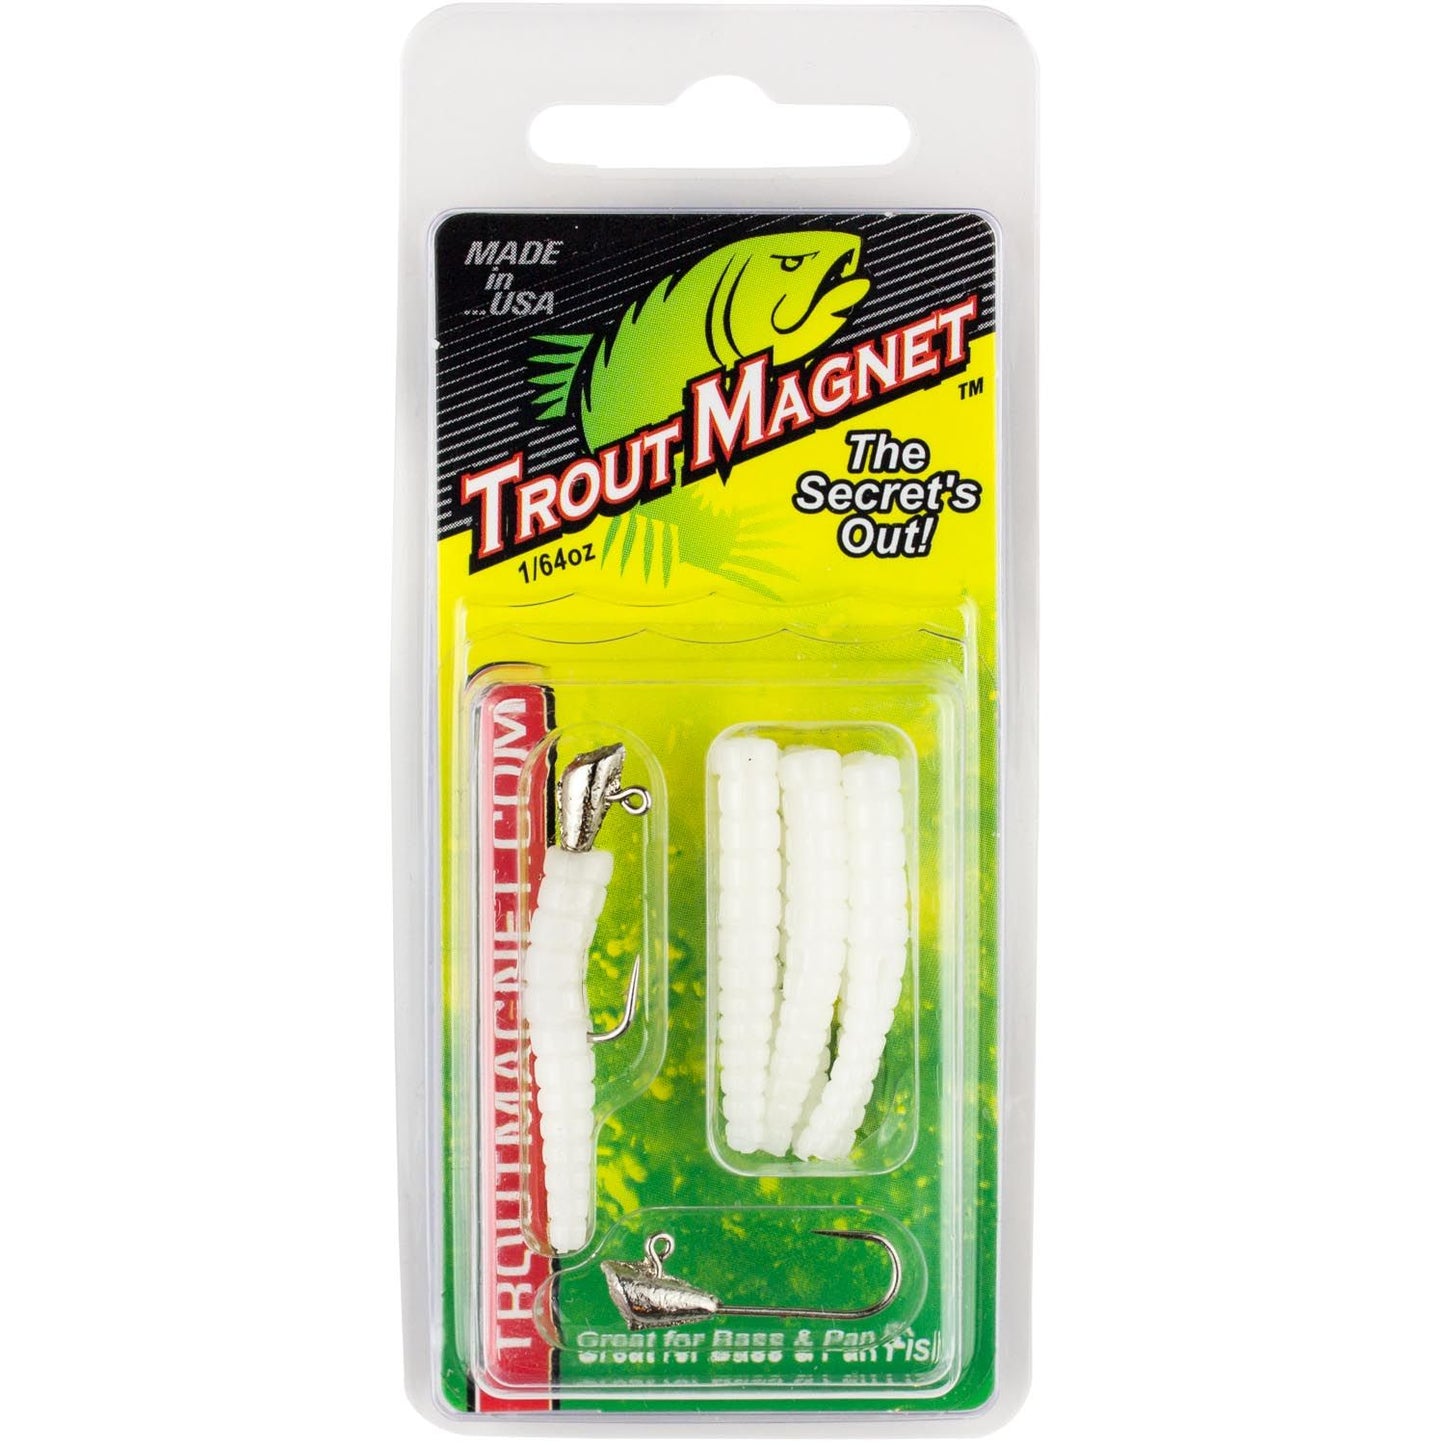 Trout Magnet 9pc Pack